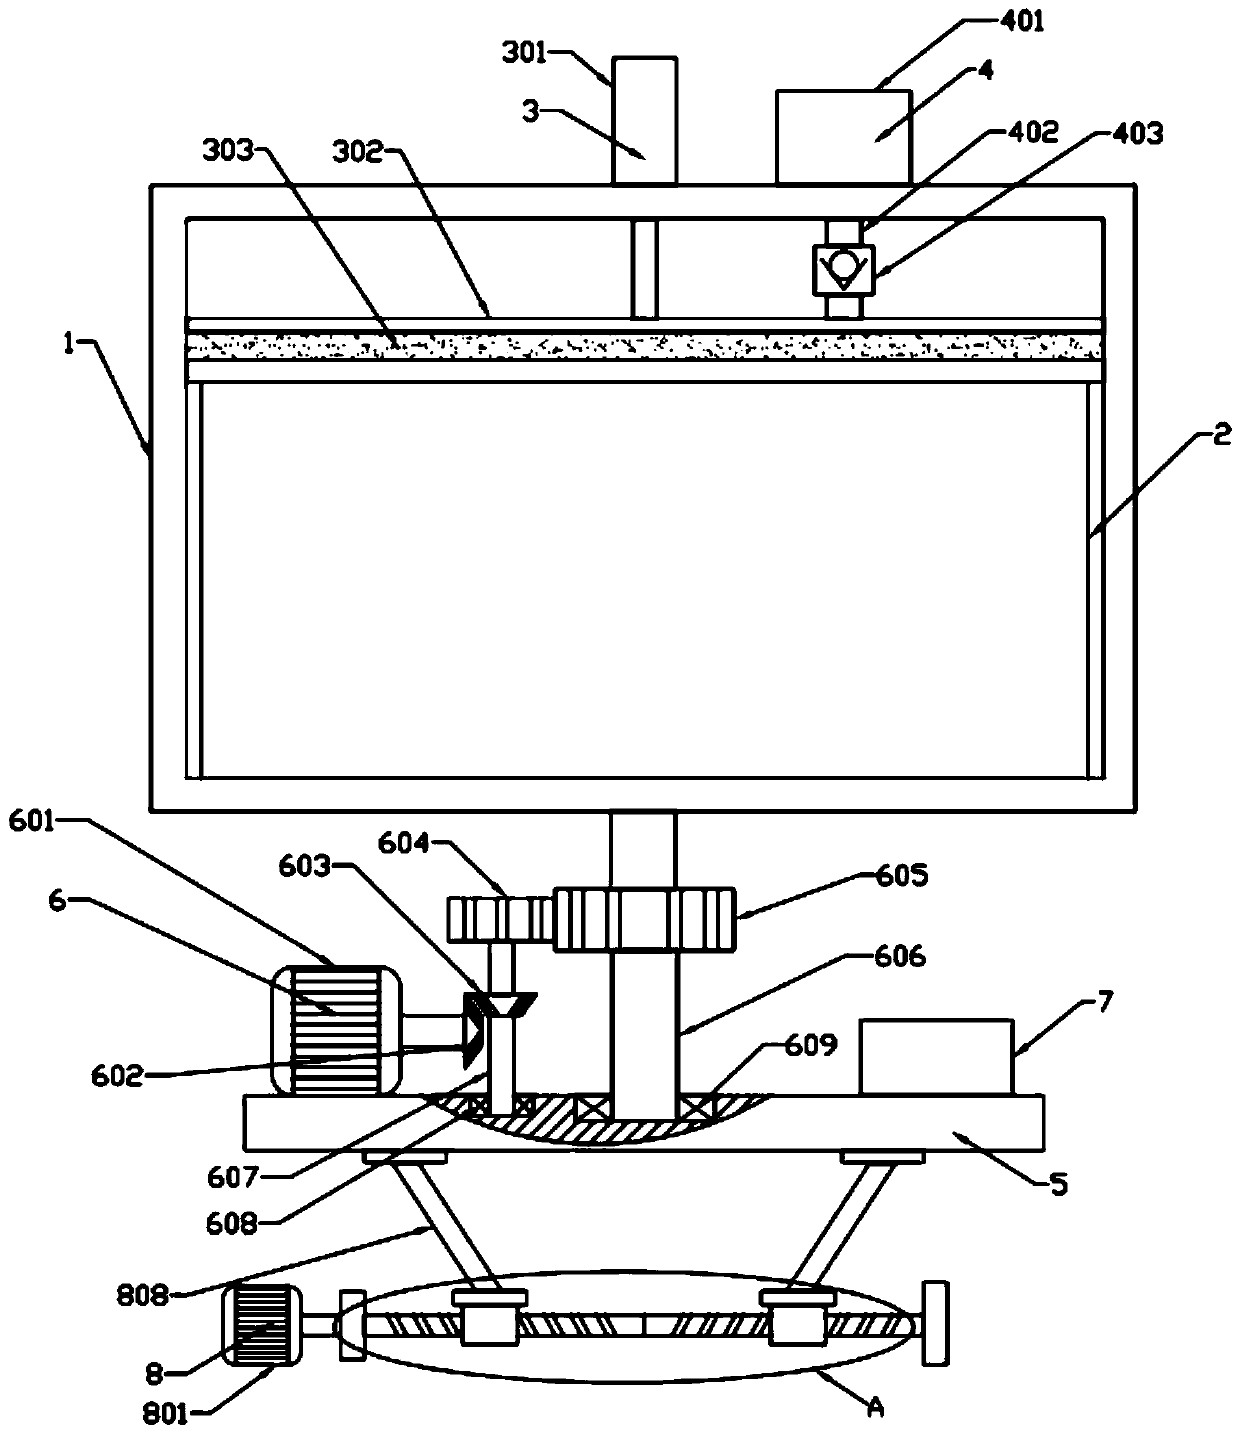 Display device for information technology teaching